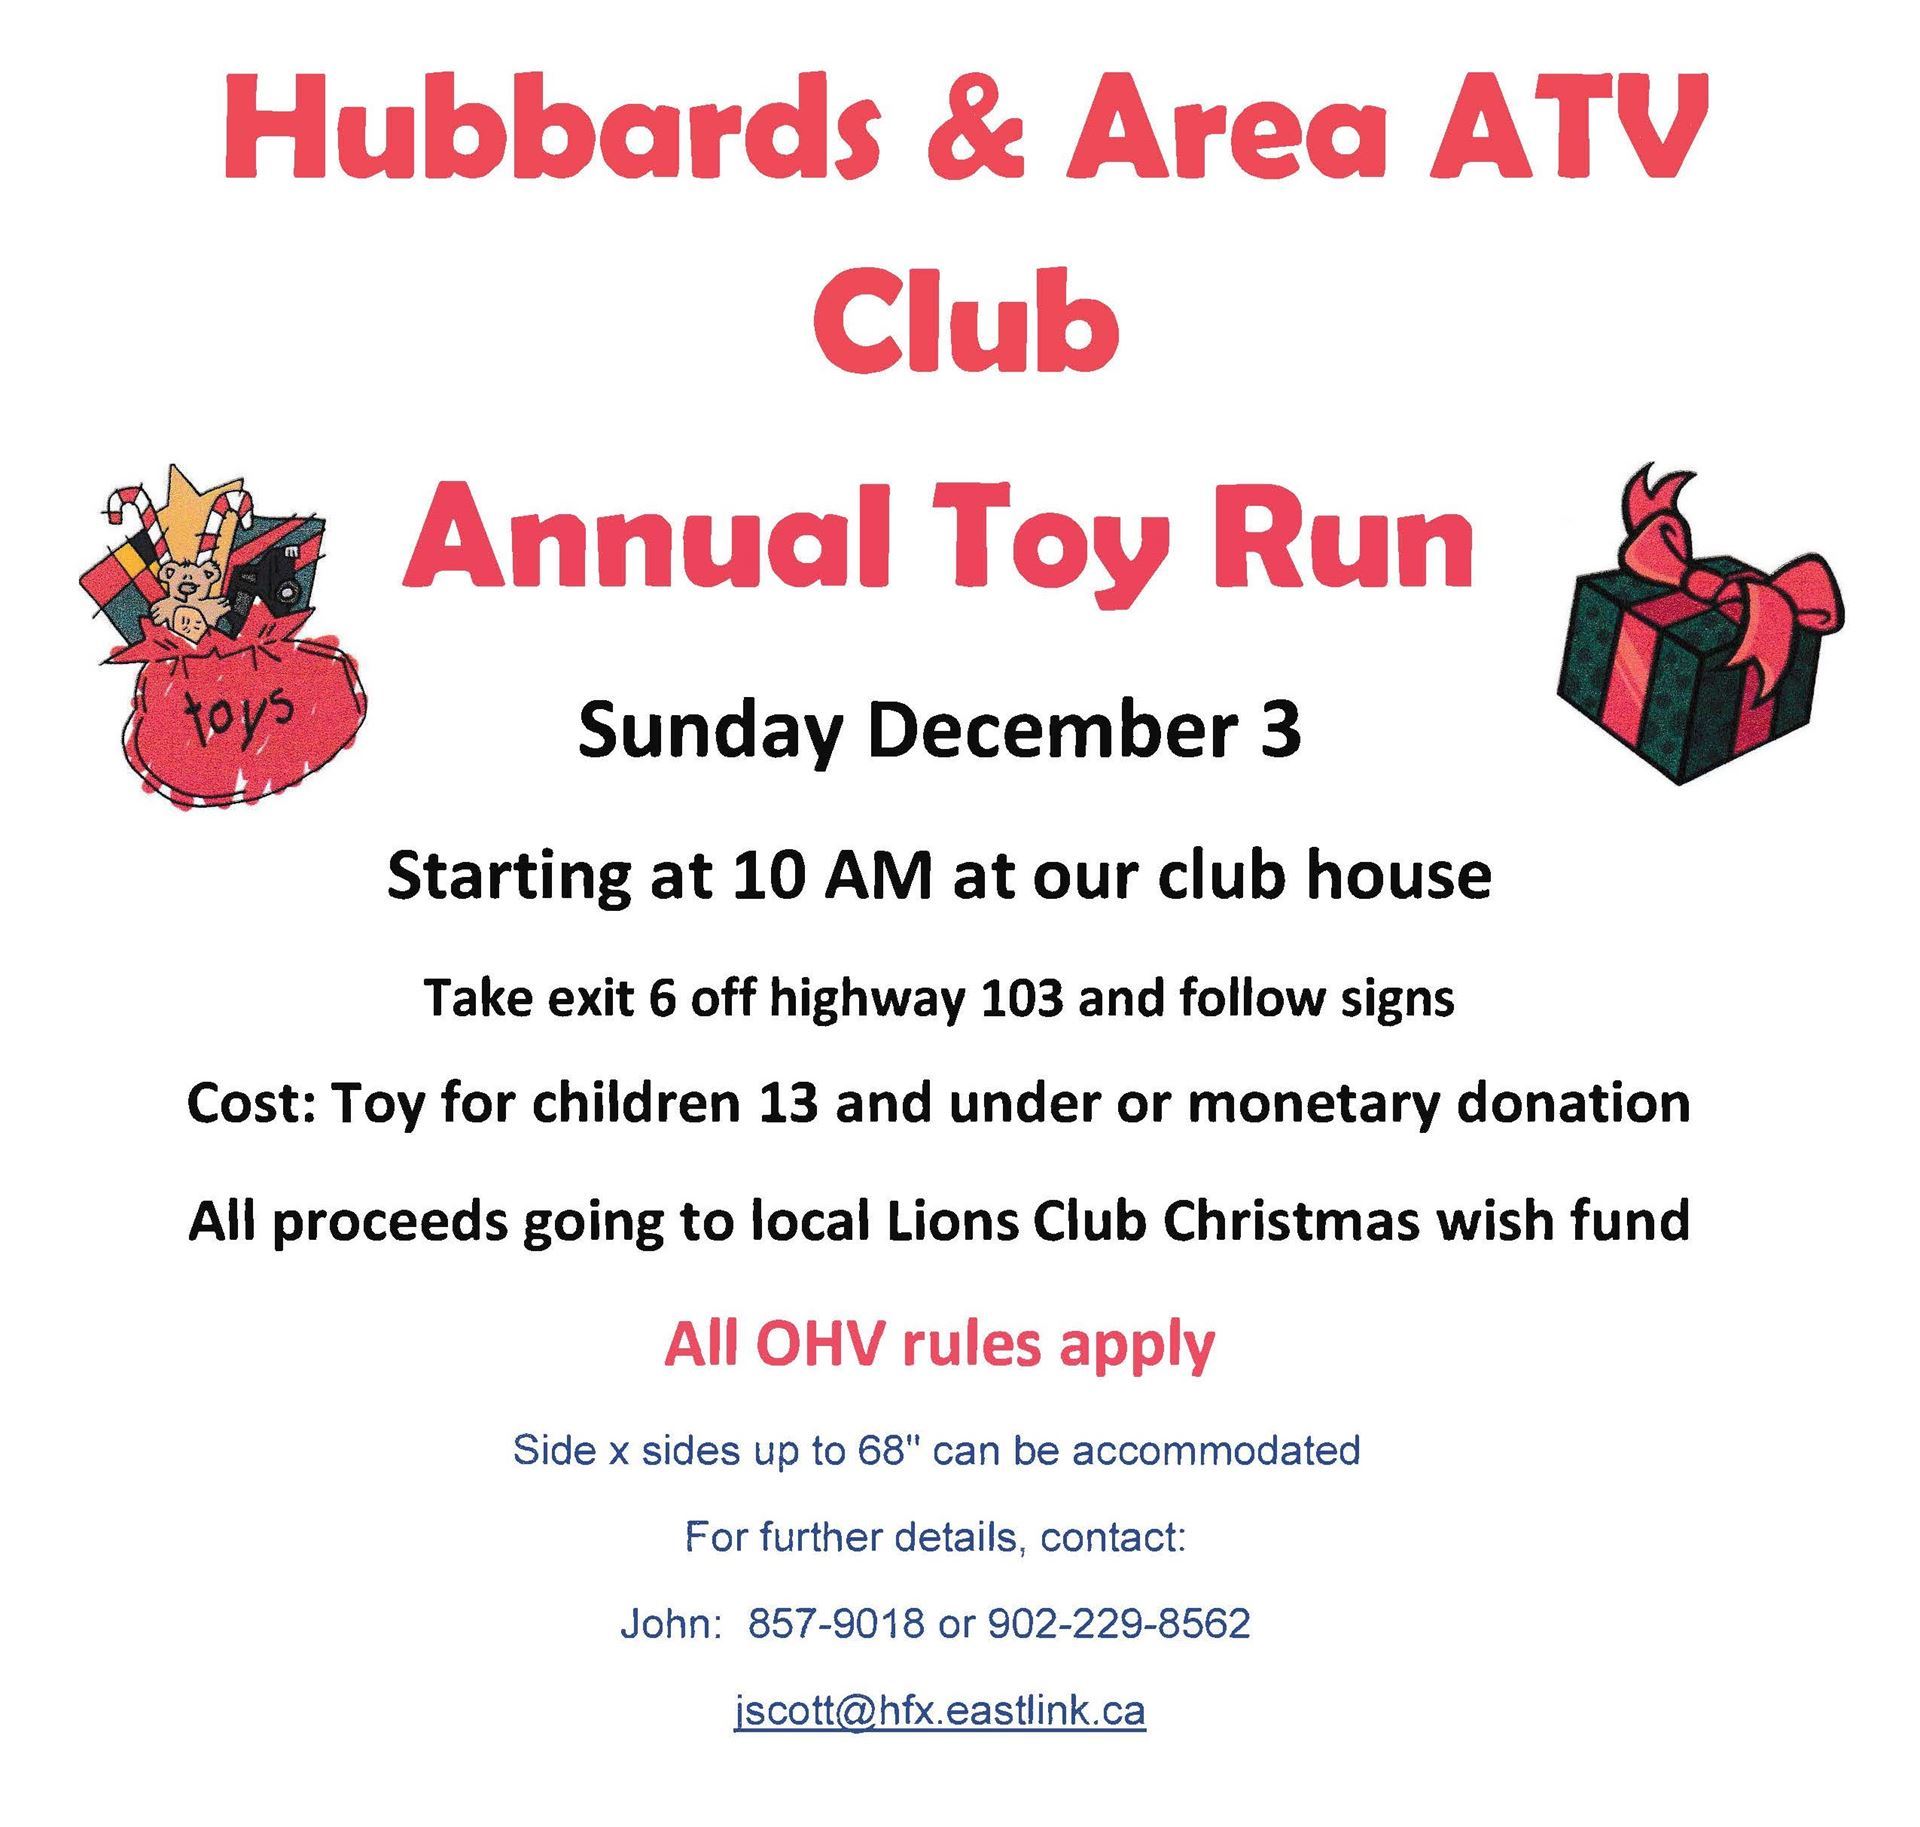 Hubbards Annual Toy Run December 3rd 10am. Take Exit 6 off Hwy 103 and follow signs. Cost: Toy or monetary donation.